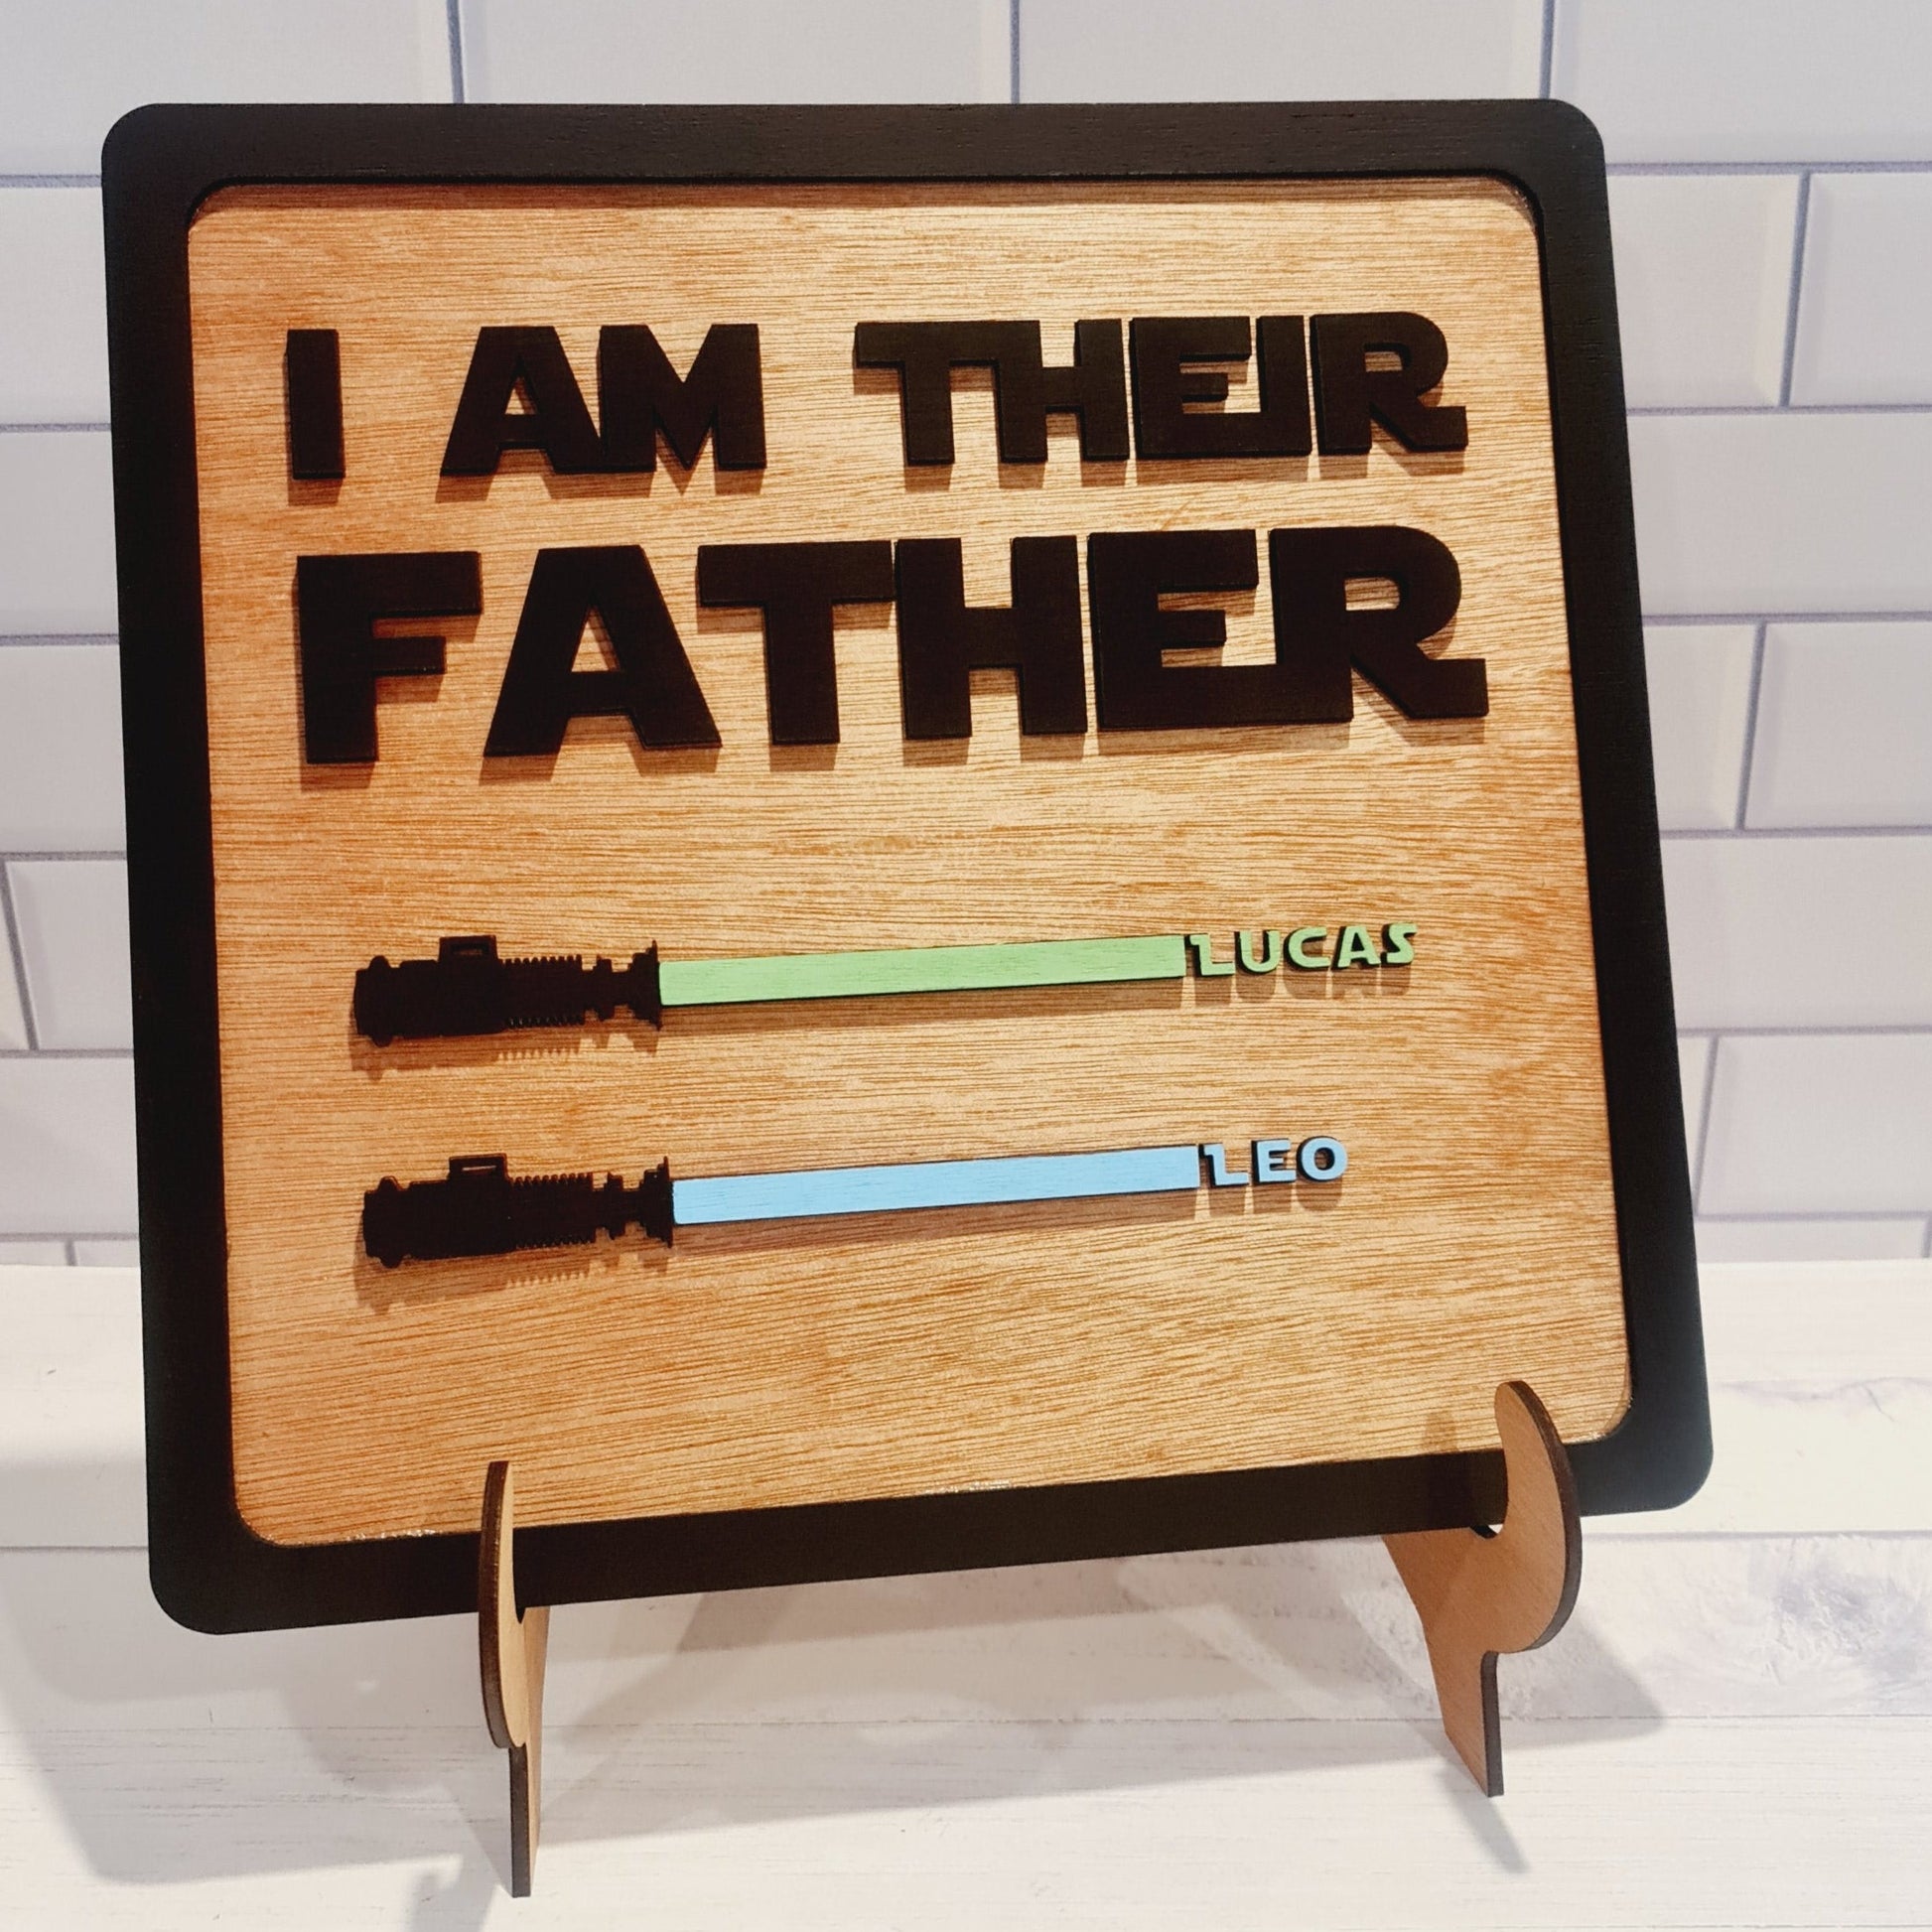 Star Wars Fathers Day Gift